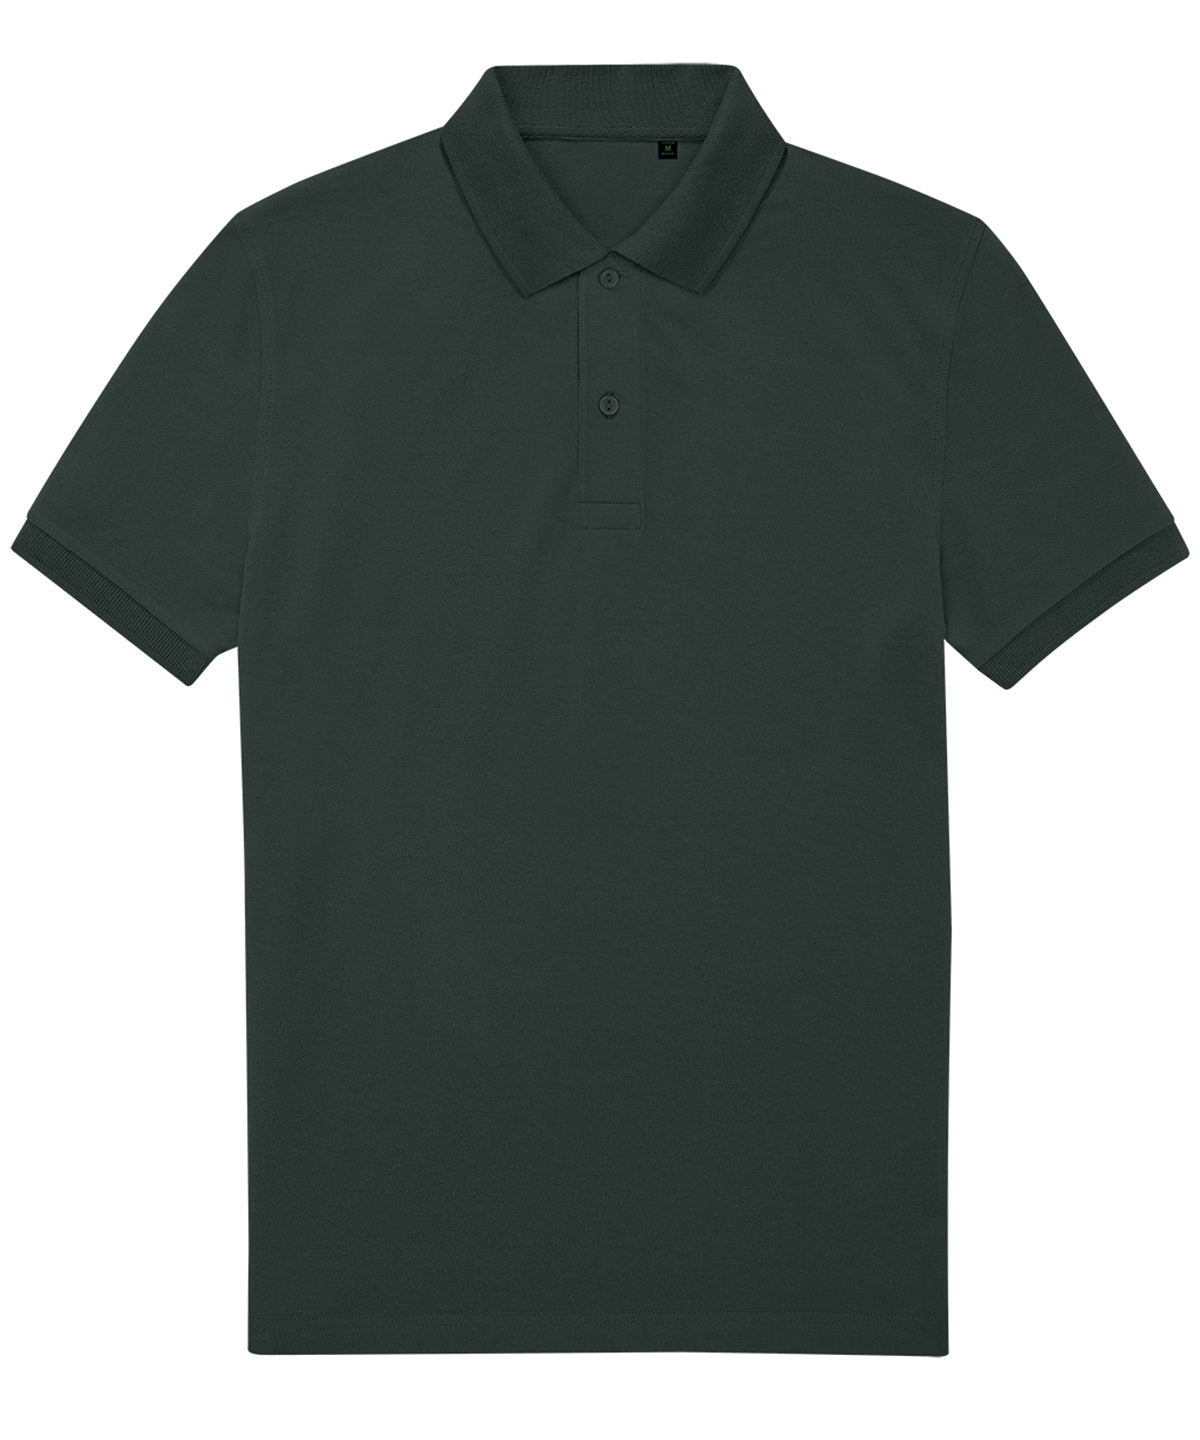 B&C Collection My Eco Polo 65/35 Dark Forest